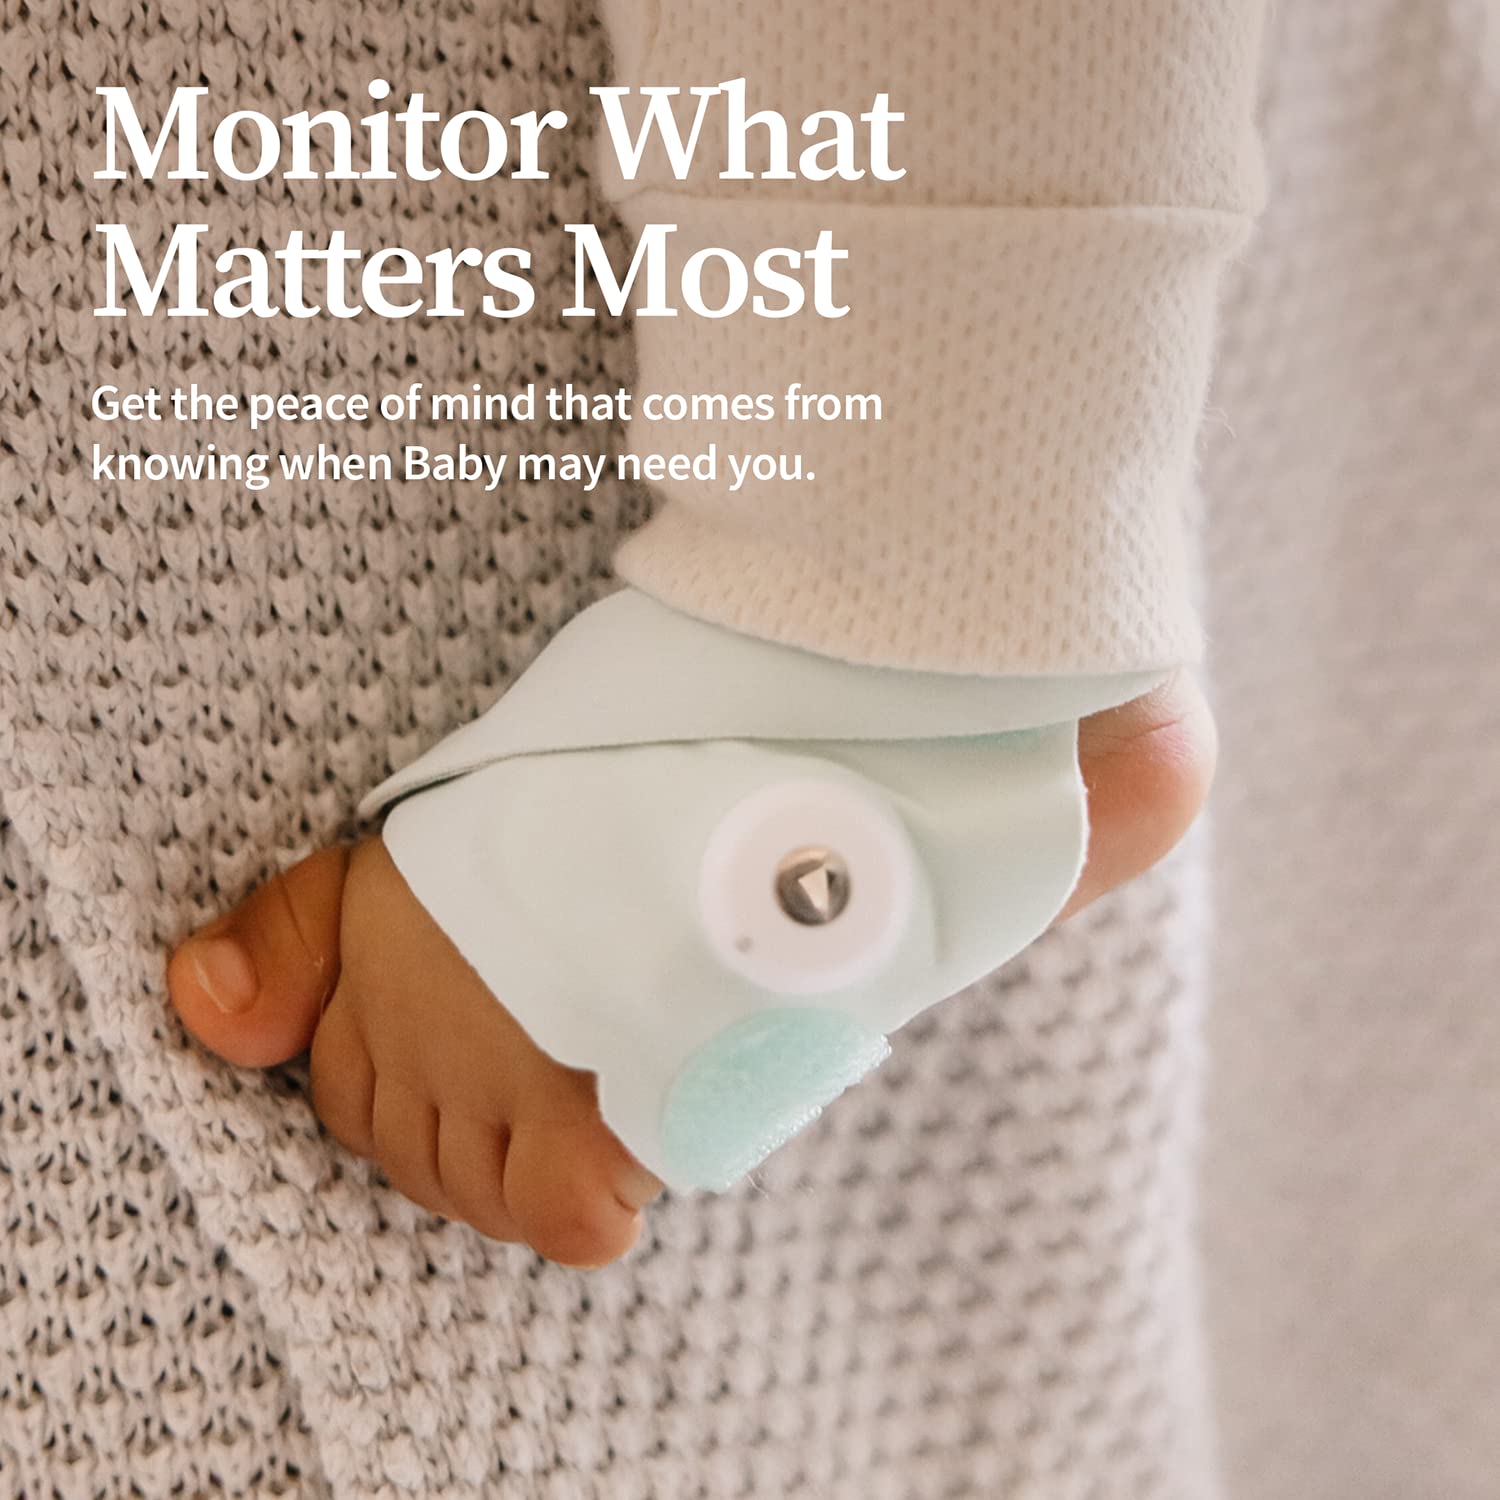 Owlet Dream Sock - Smart Baby Monitor with Heart Rate and Average Oxygen O2 as Sleep Quality Indicators, Dusty Rose